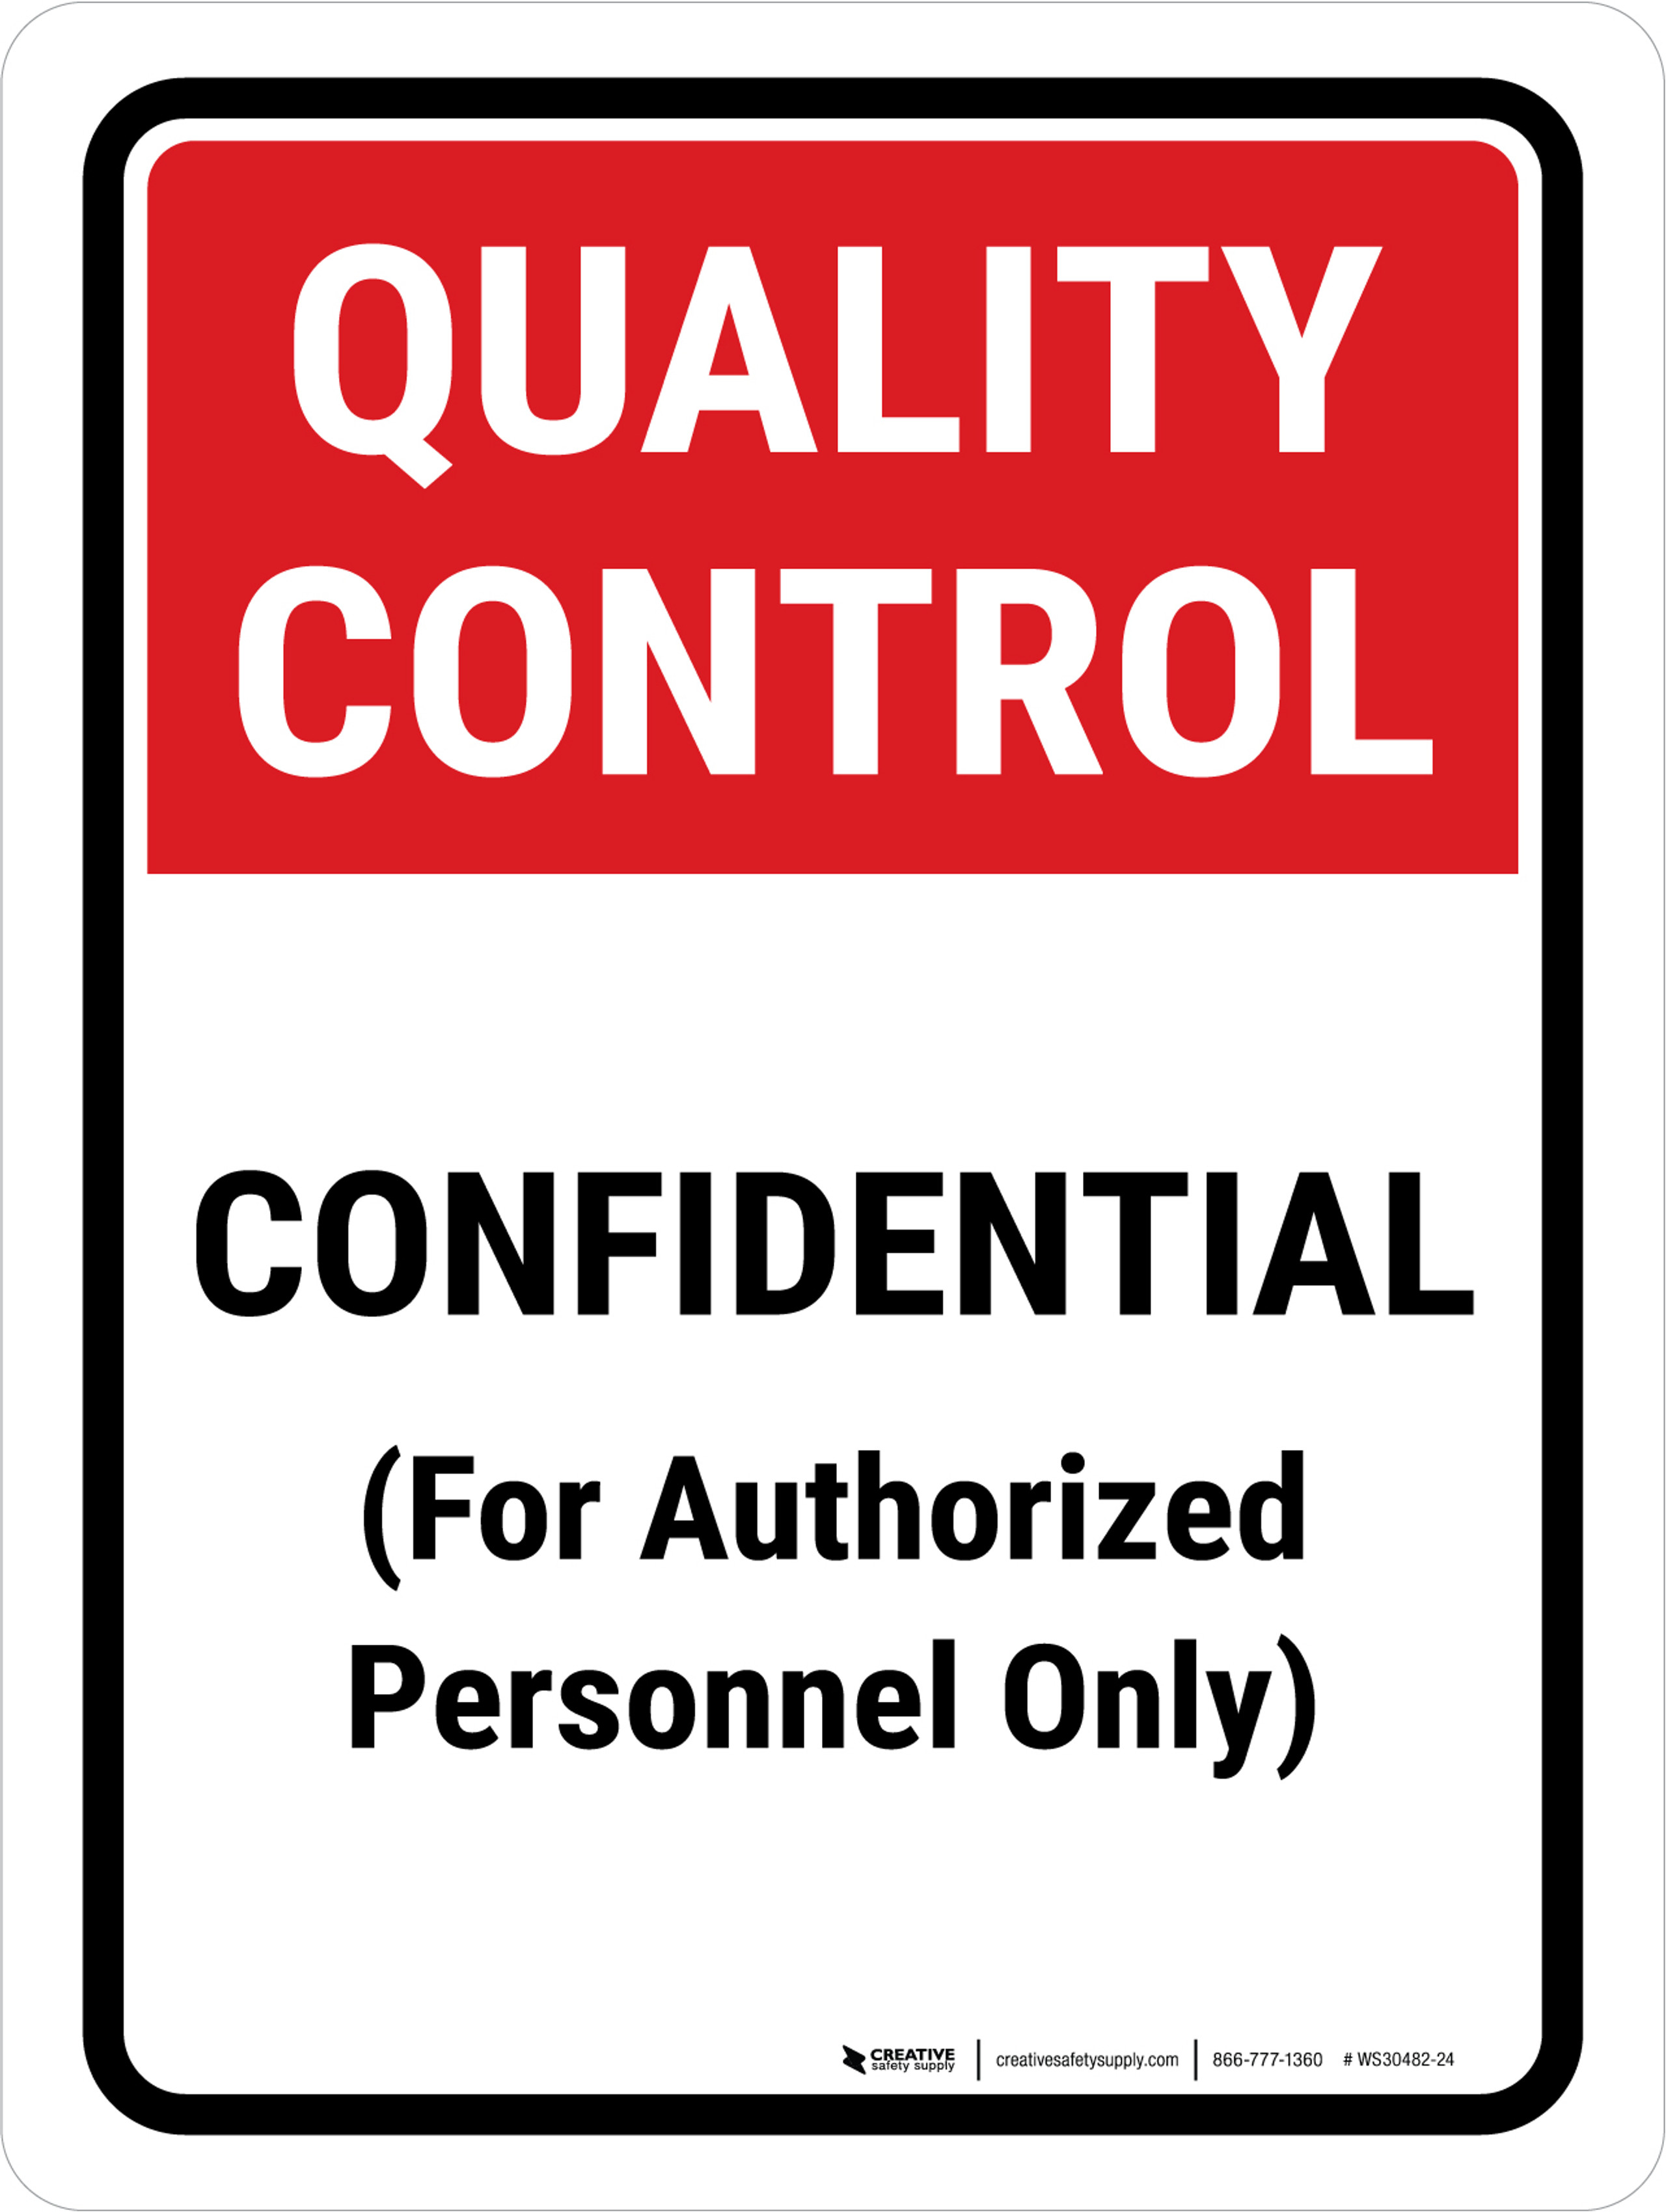 Quality Control Confidential For Authorized Personnel Only Portrait Wall Sign 3494